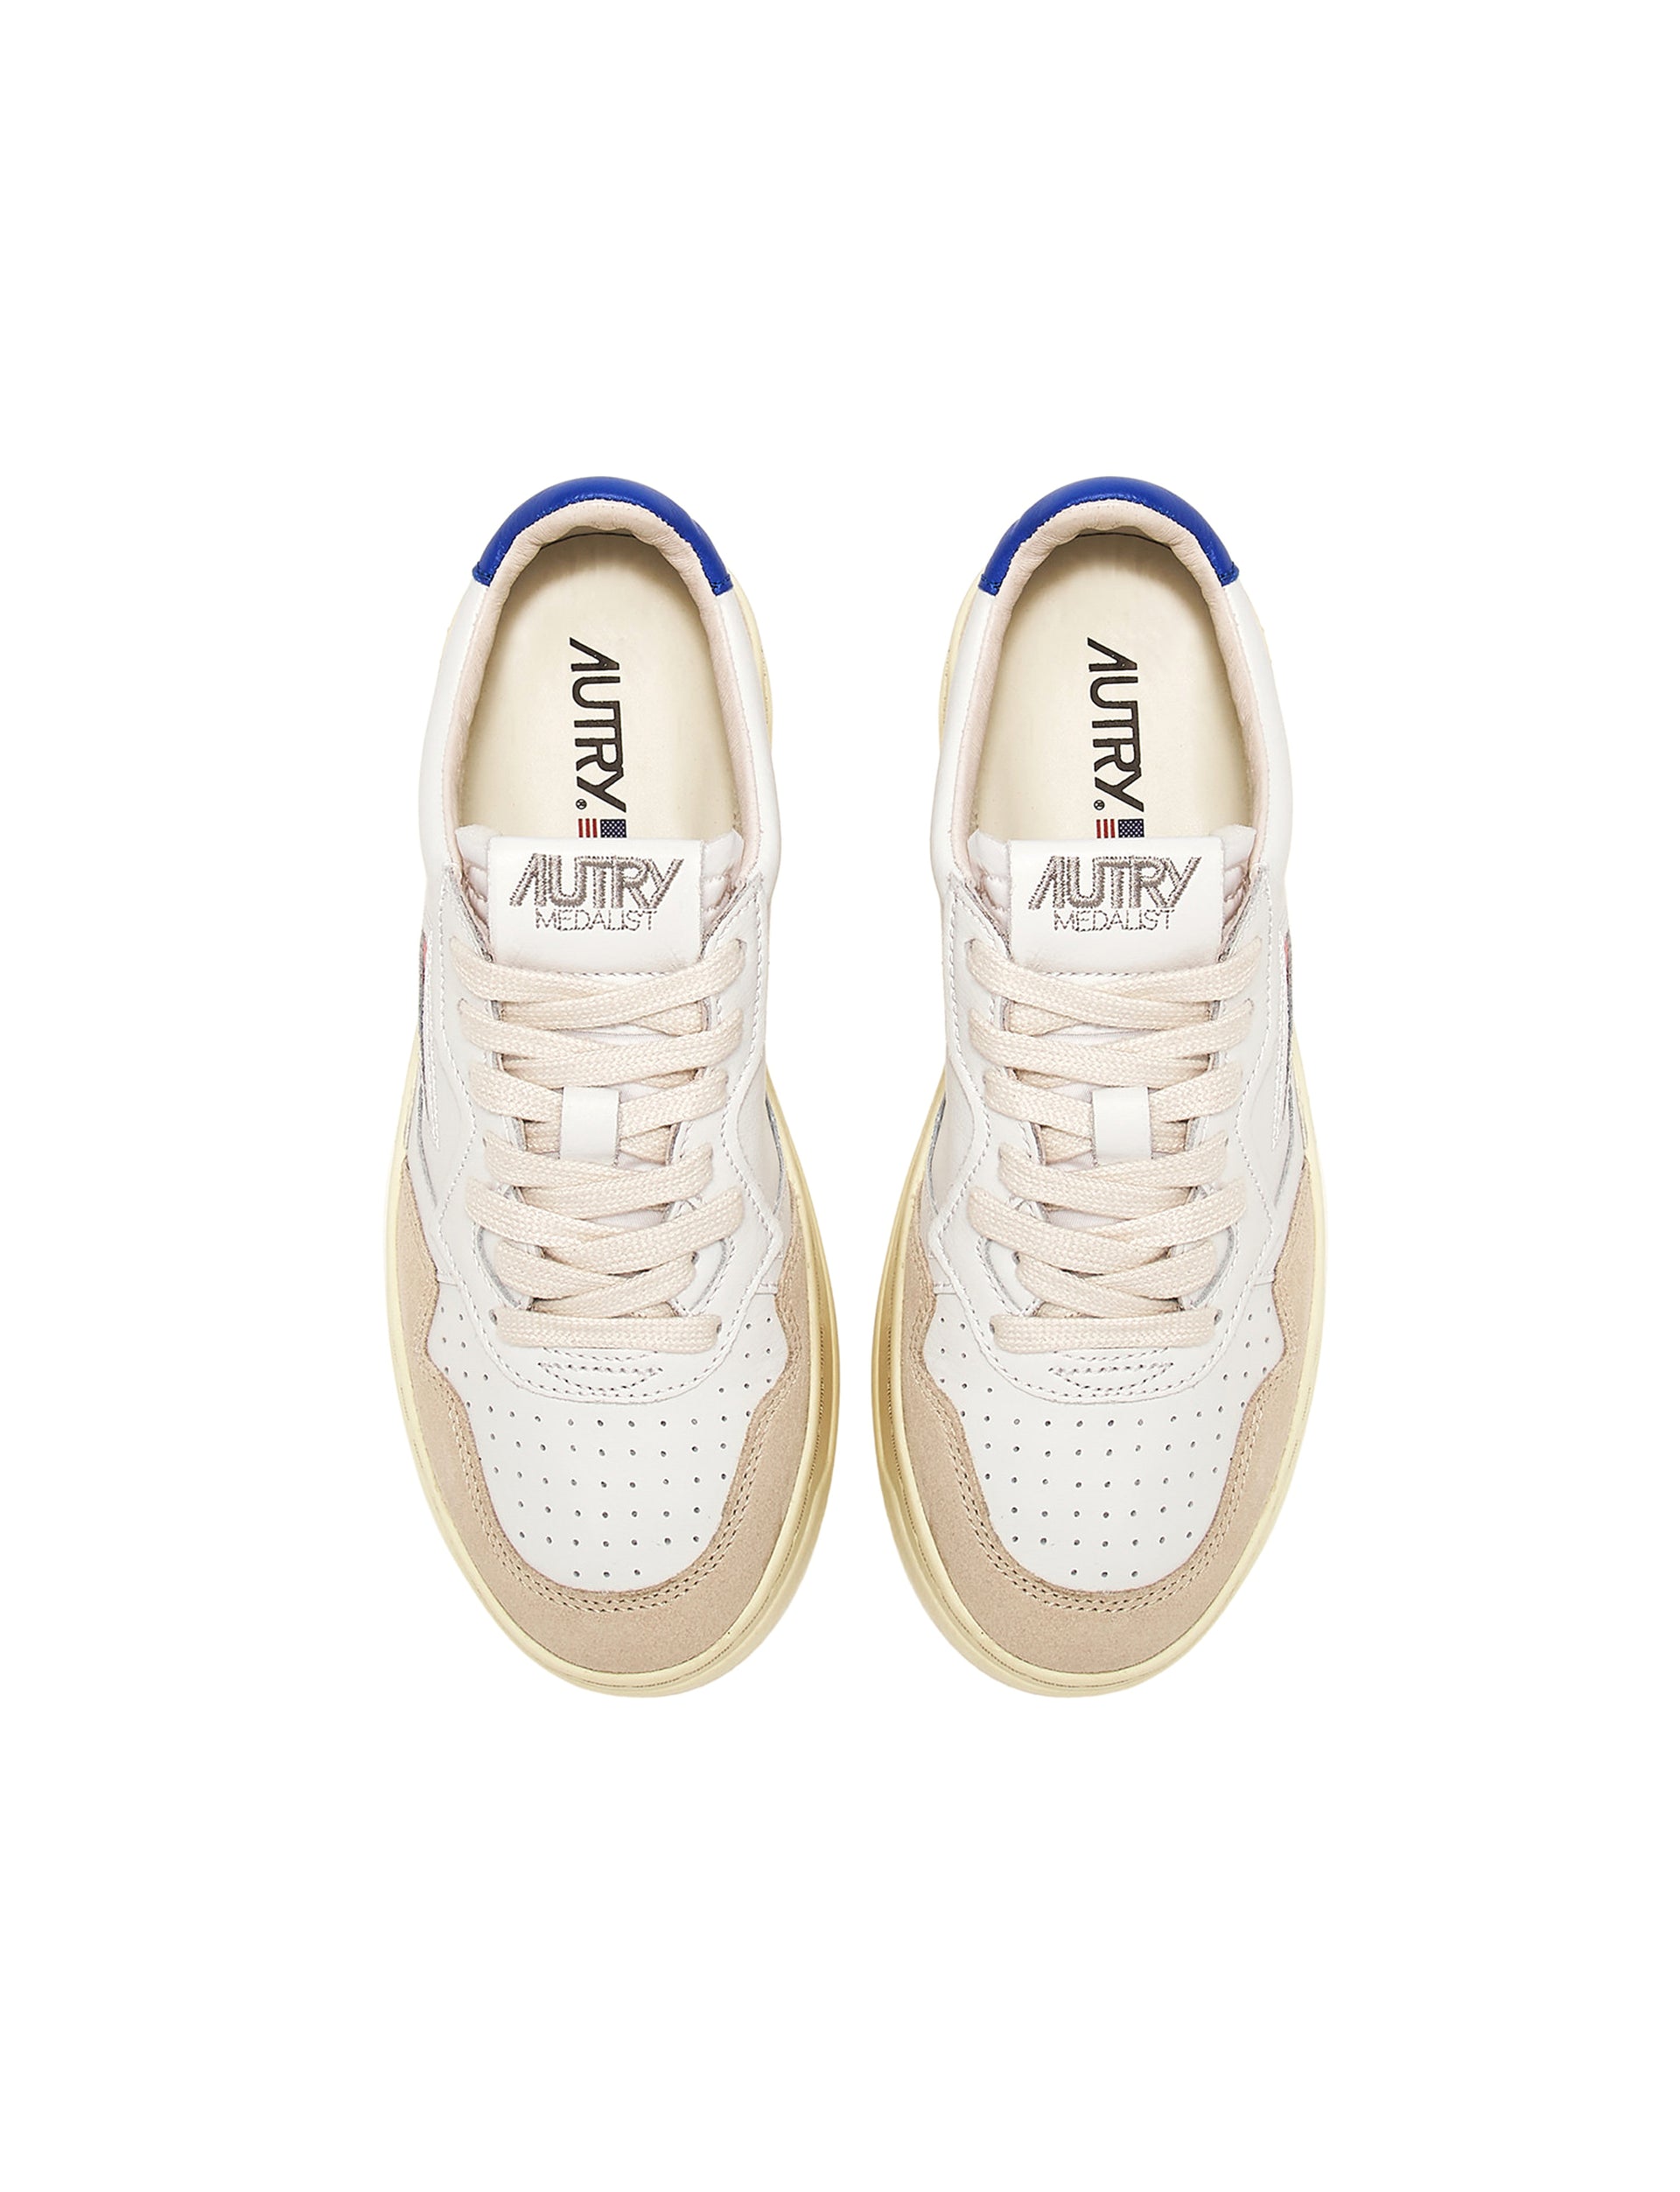 AUTRY SNEAKERS MAN MEDALIST LOW SNEAKERS IN SUEDE AND LEATHER COLOR WHITE AND PRINCE BLUE